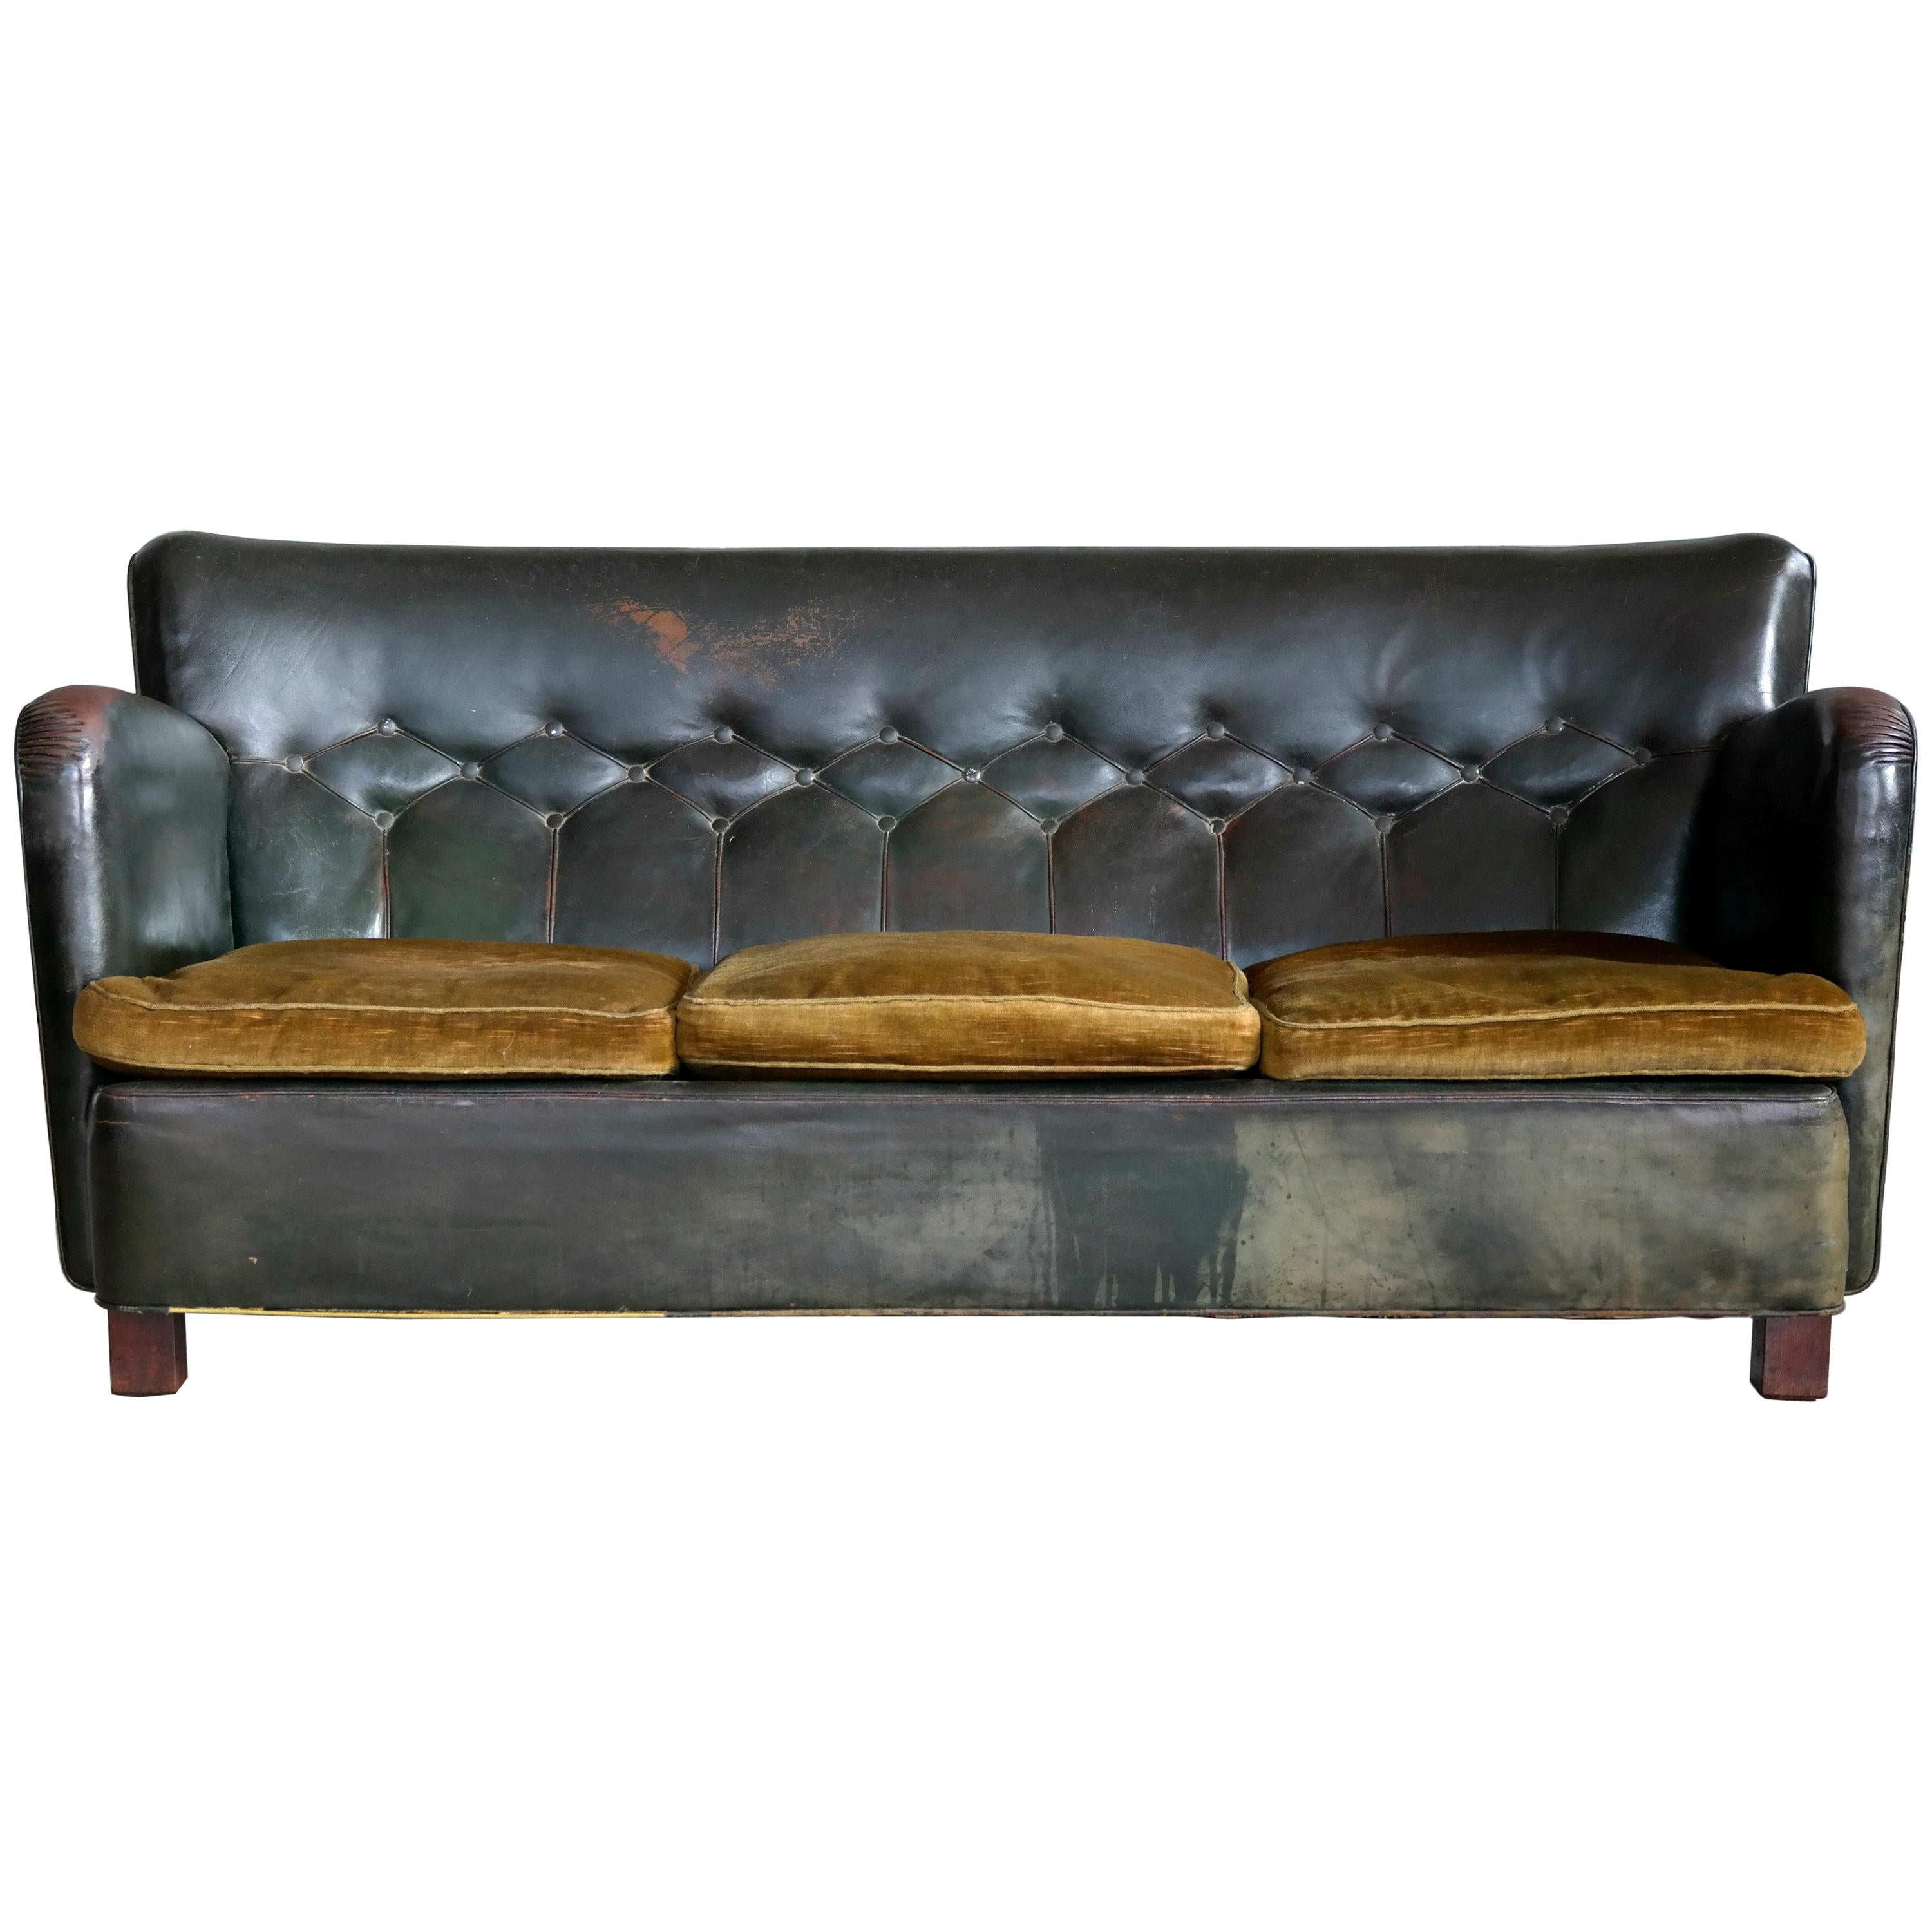 Danish 1930s Boesen and Lassen Style Tufted Club Sofa in Green Leather